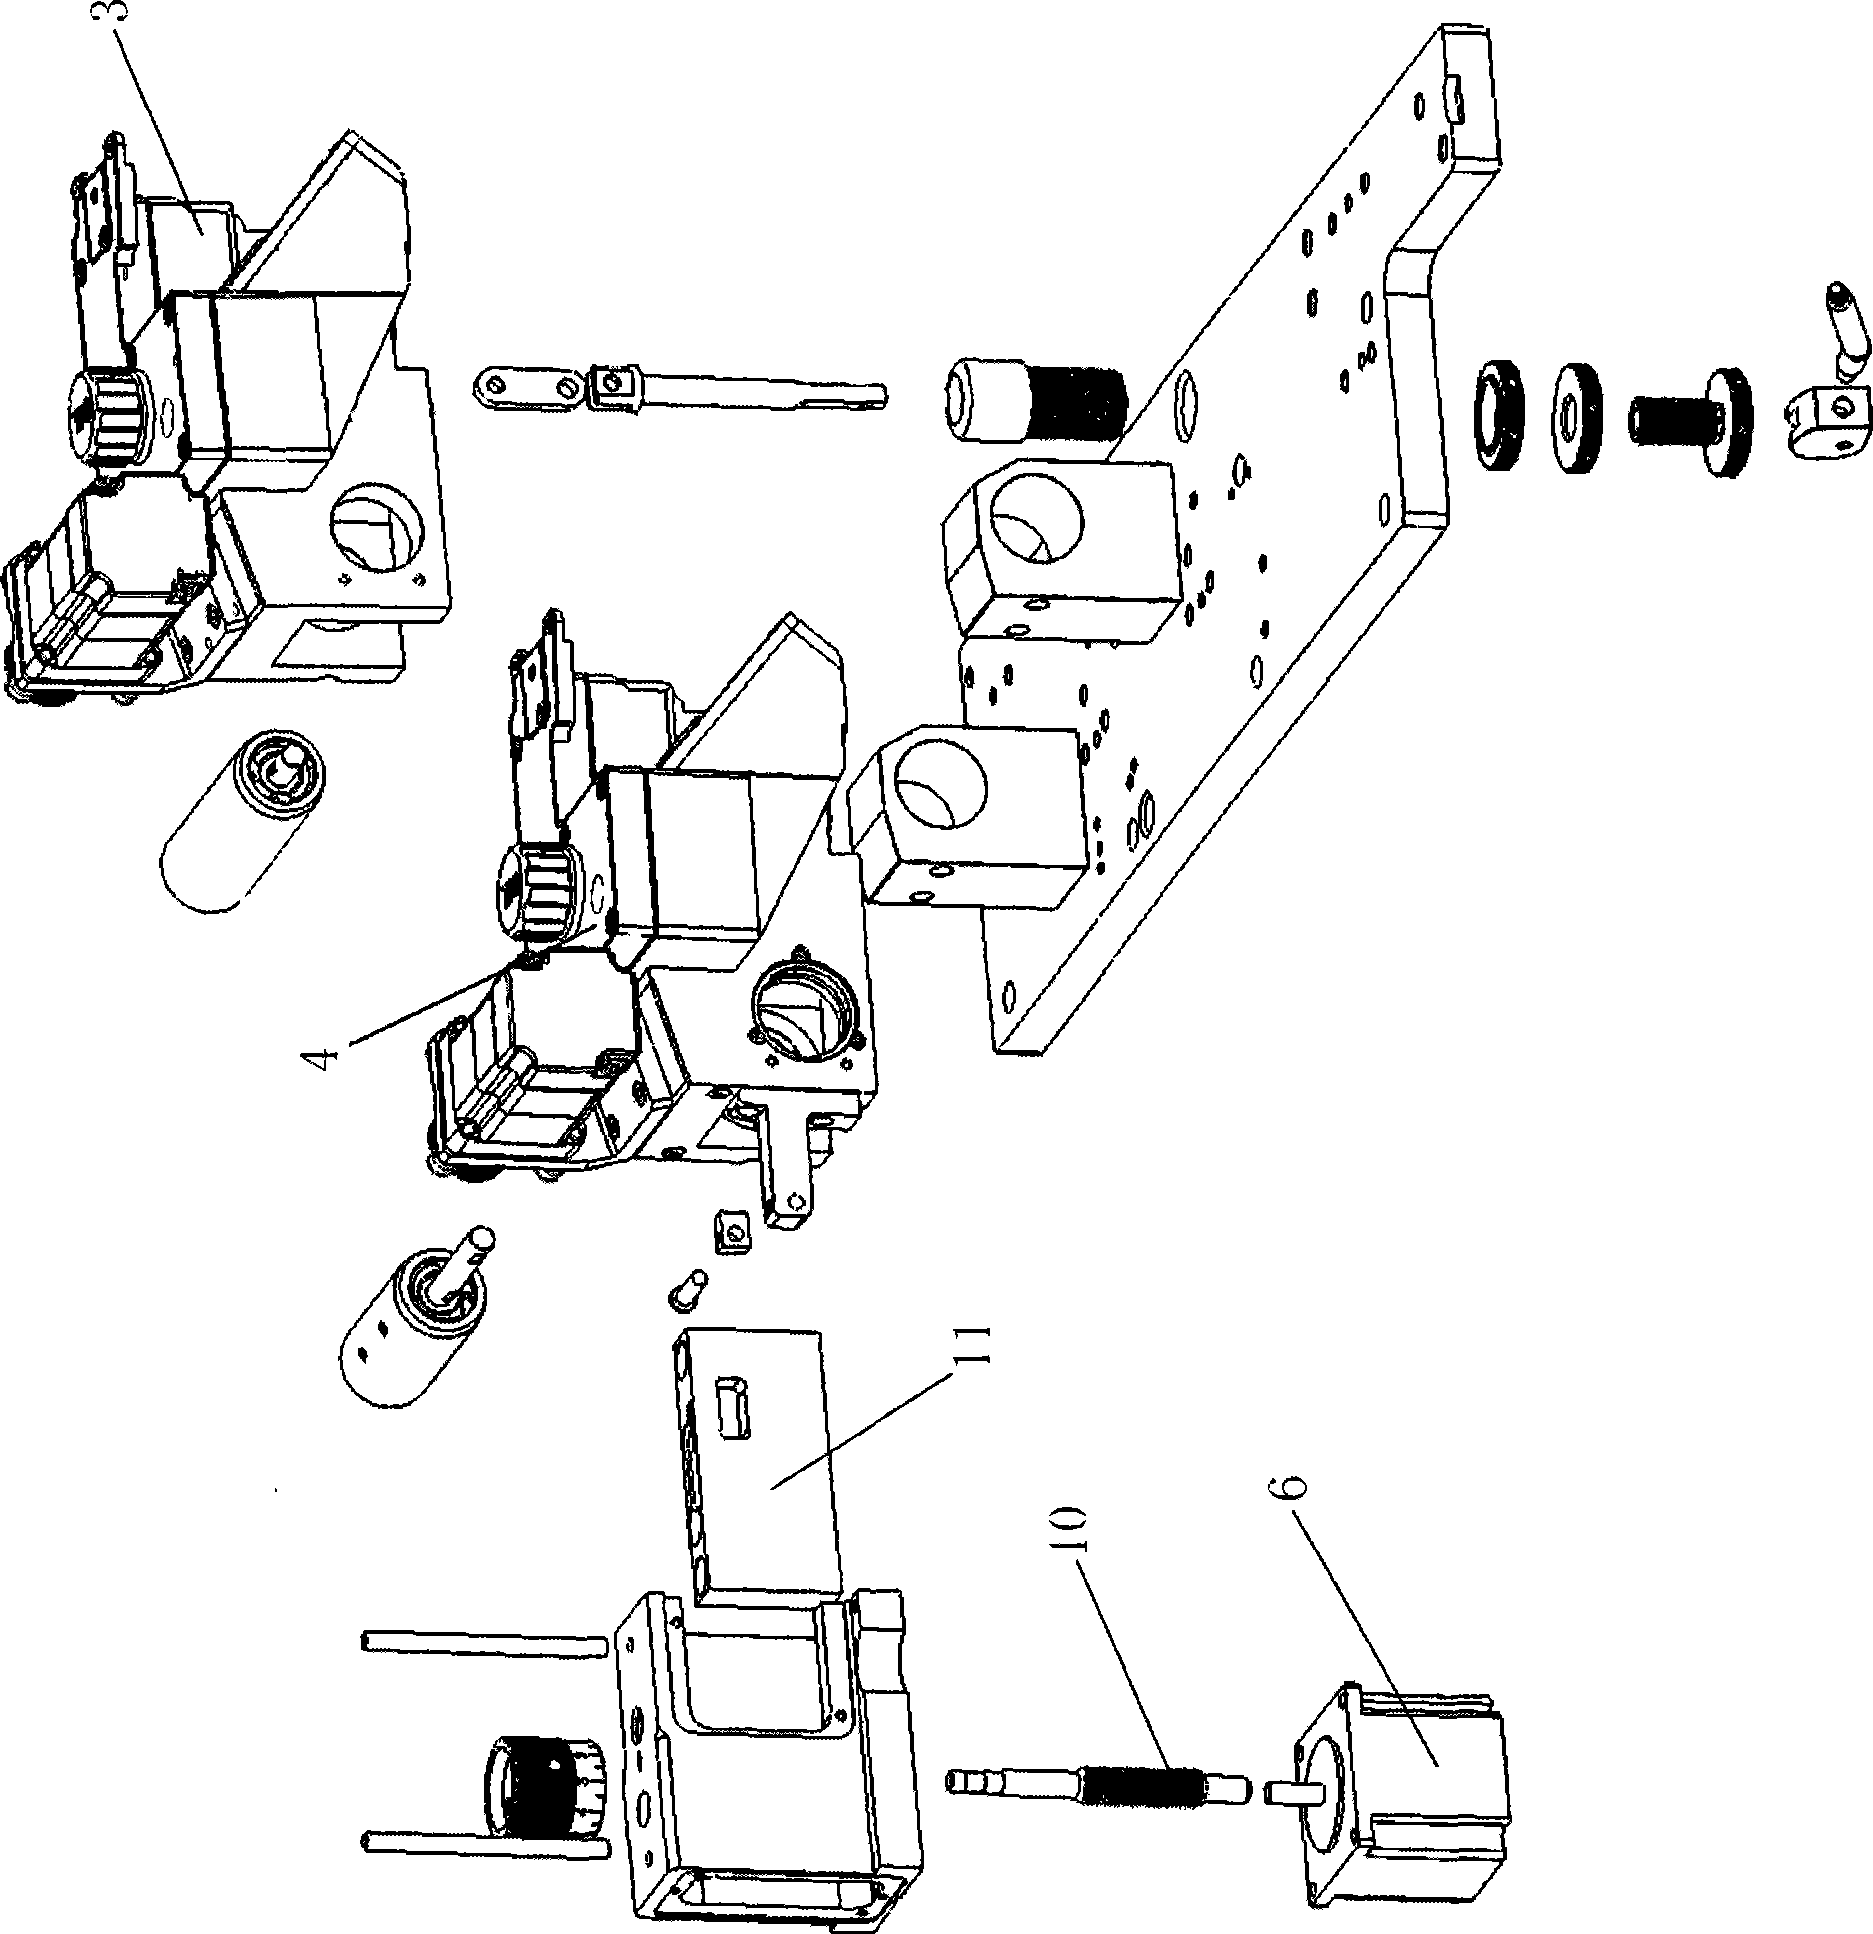 Control system of sock head sewing machine and sock head sewing machine equipped therewith